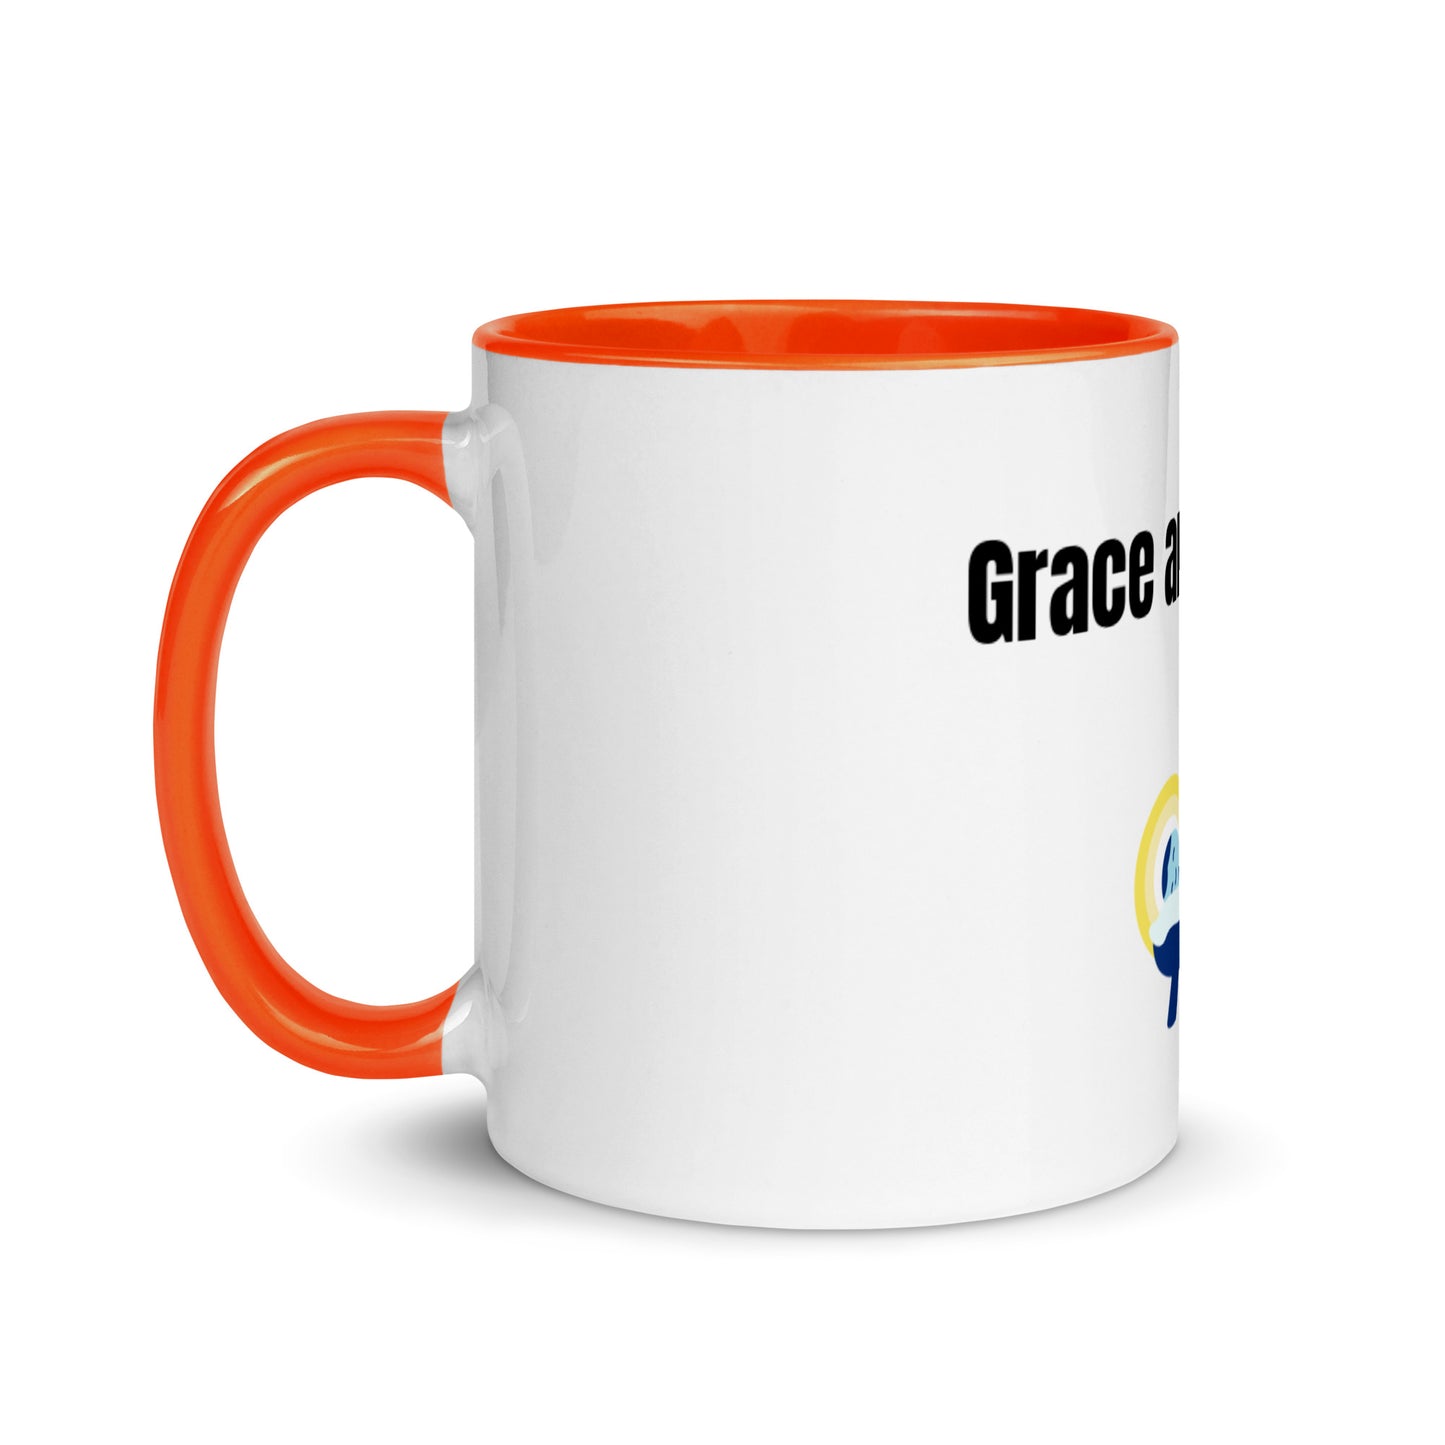 Grace And Mercy White Ceramic Mug with Color Inside